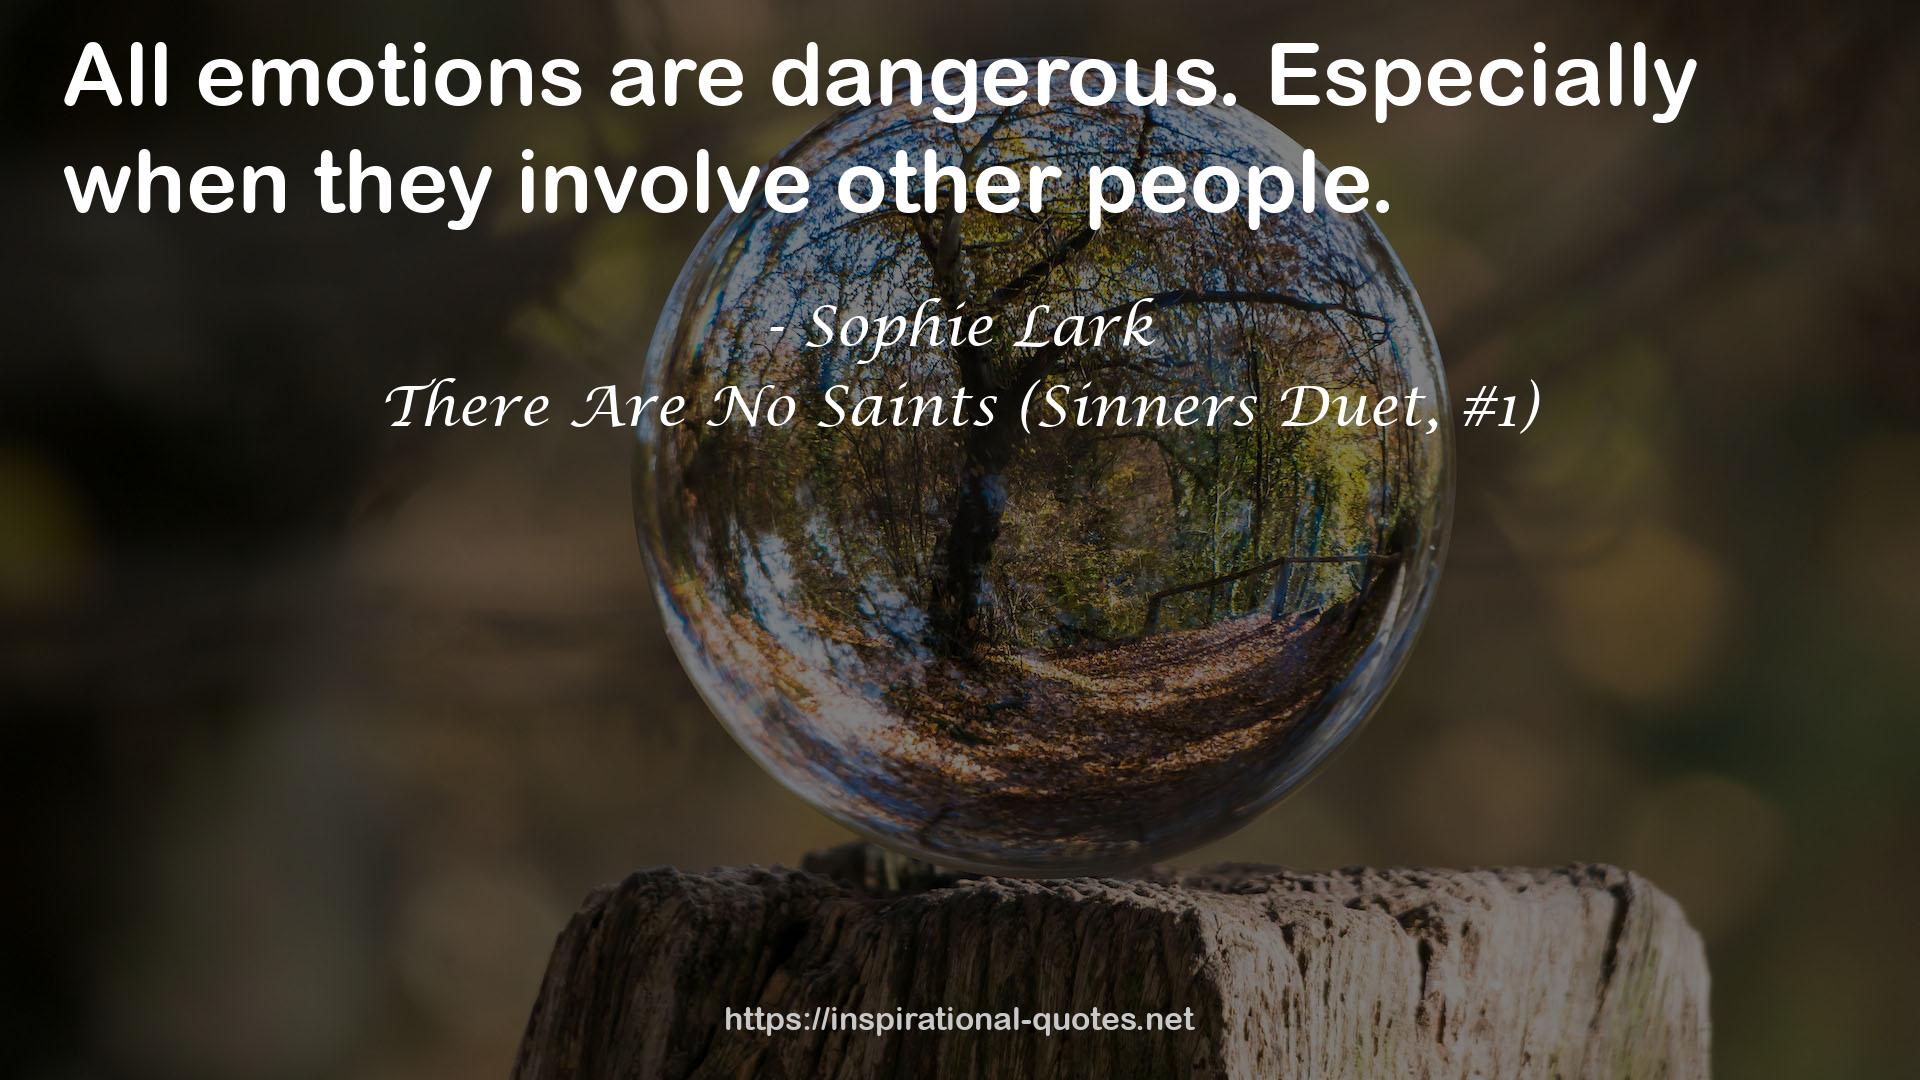 There Are No Saints (Sinners Duet, #1) QUOTES